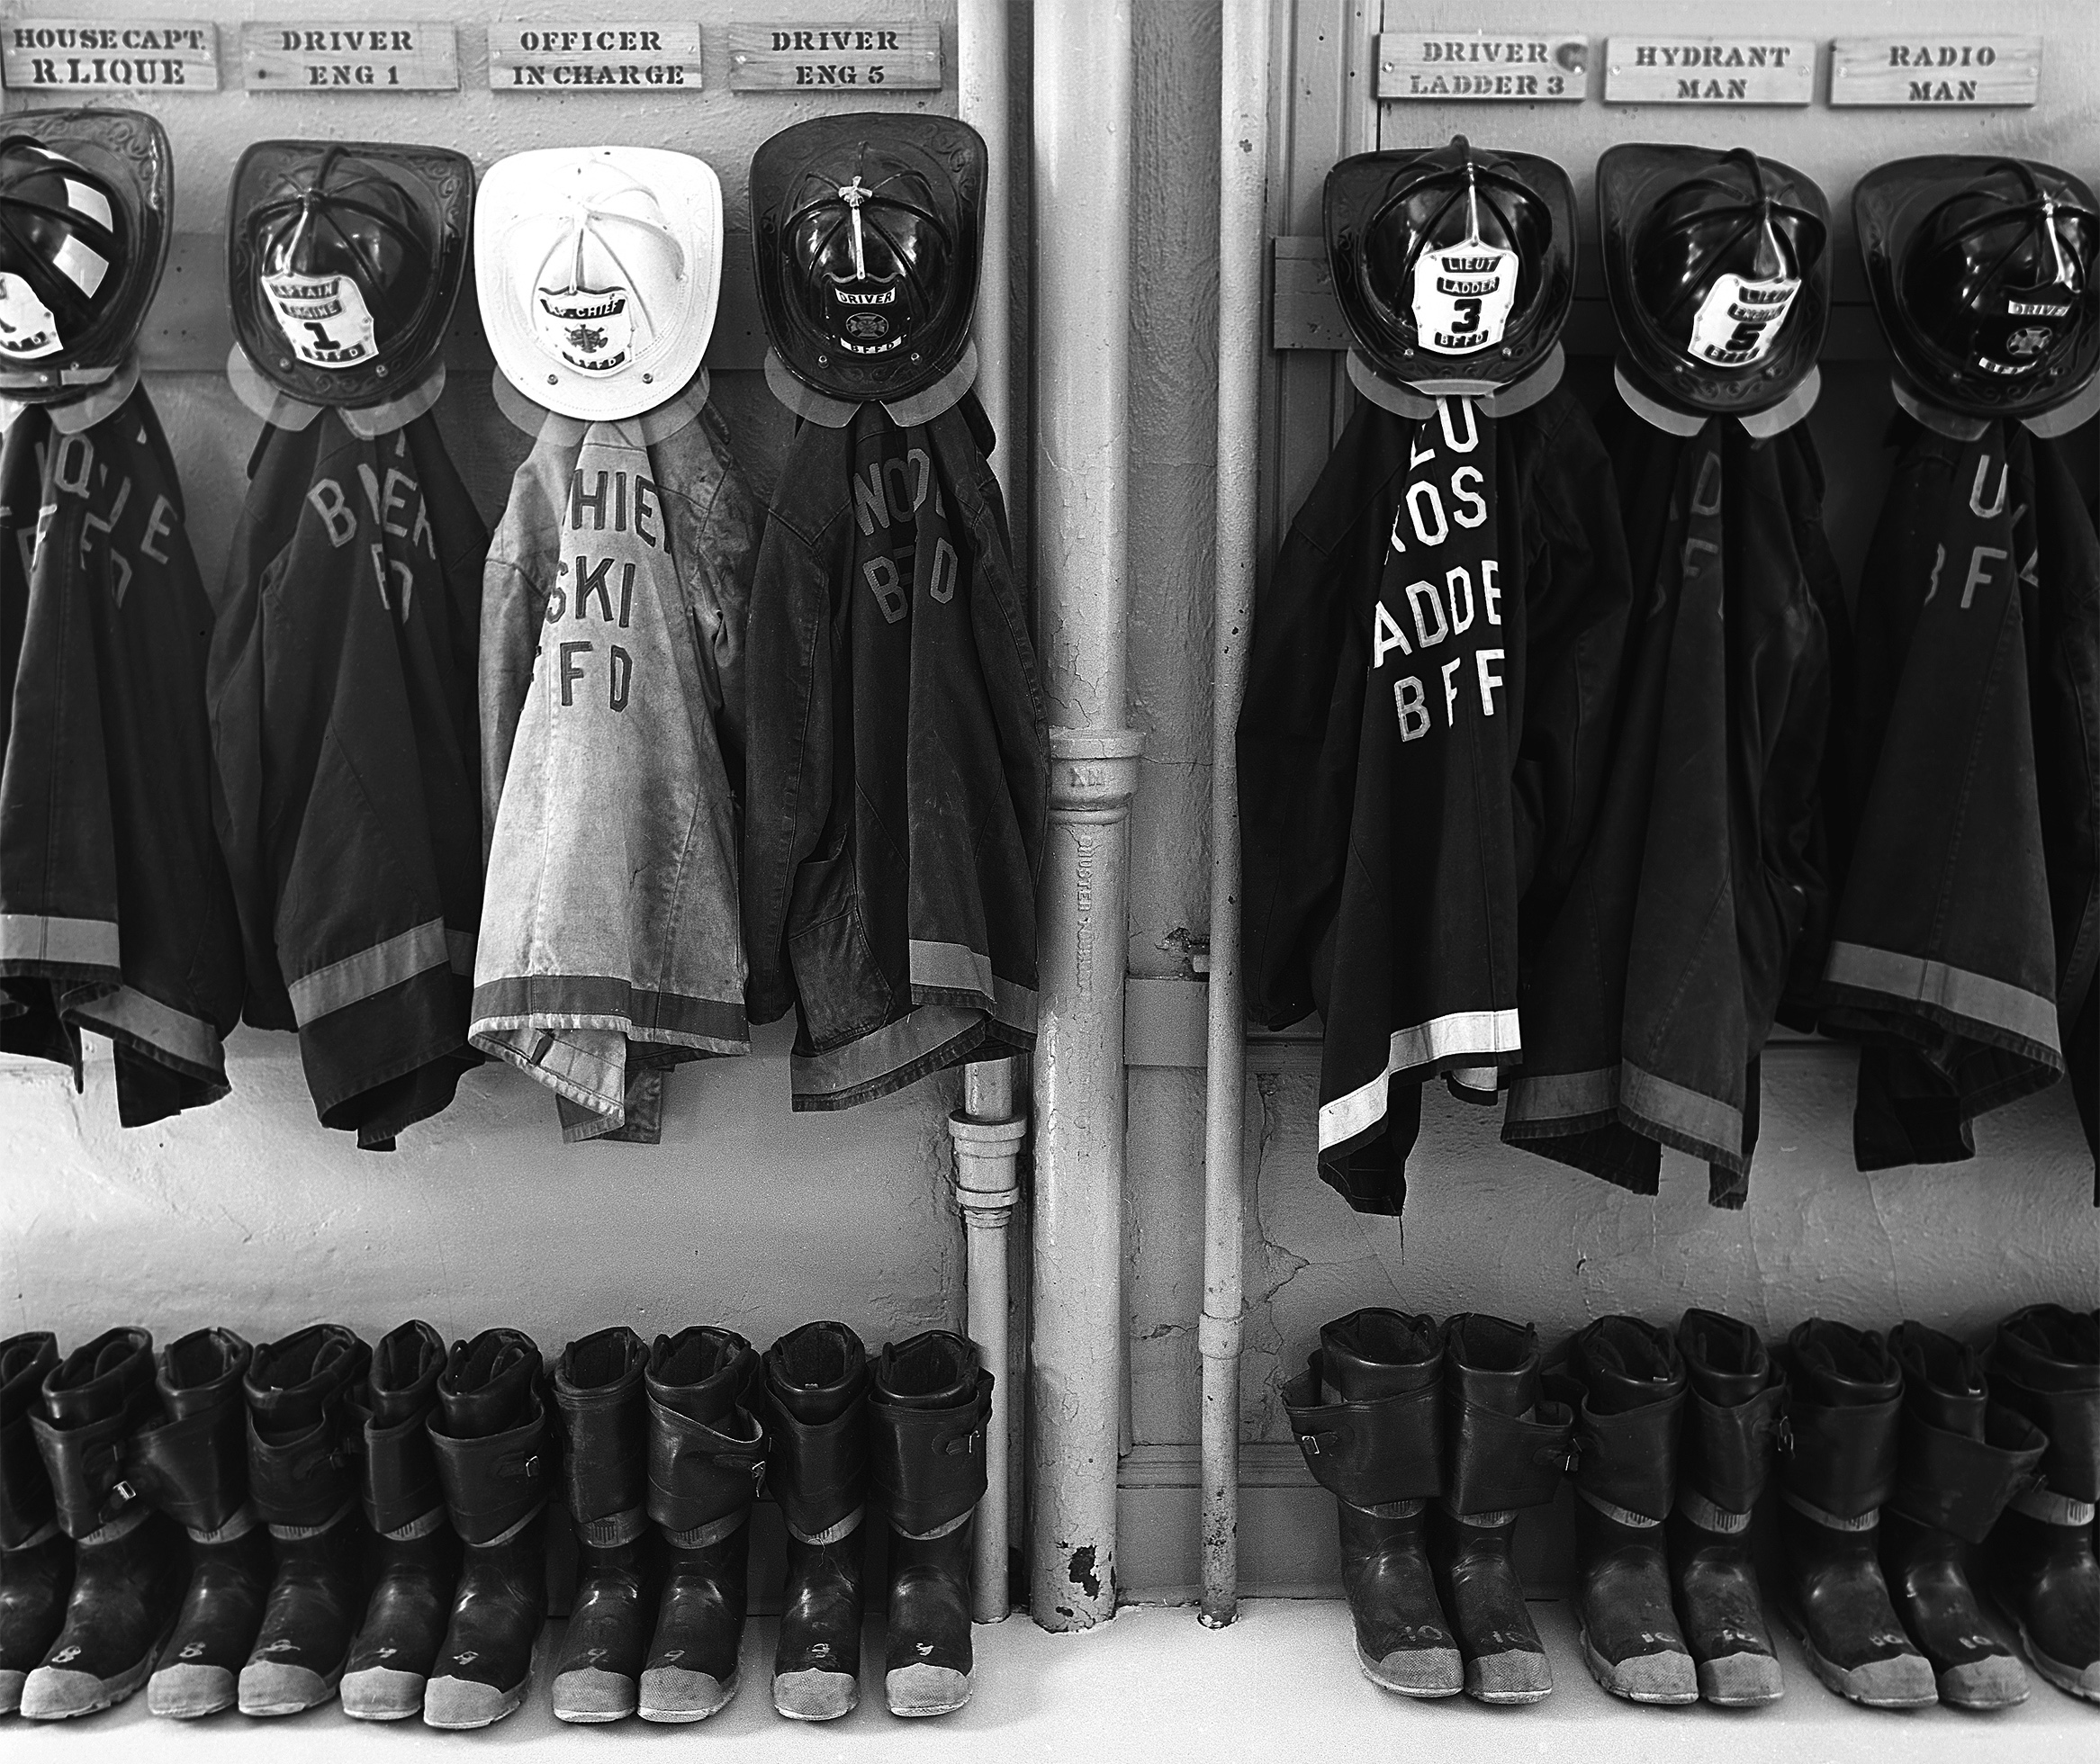 Firefighter turnout gear—helmet and coat—hang from a wall with boots aligned on the floor below in a fire station in Bellows Falls, New Hampshire, in 1978. Above each set of gear is a wooden plaque with an assigned task stenciled on it.